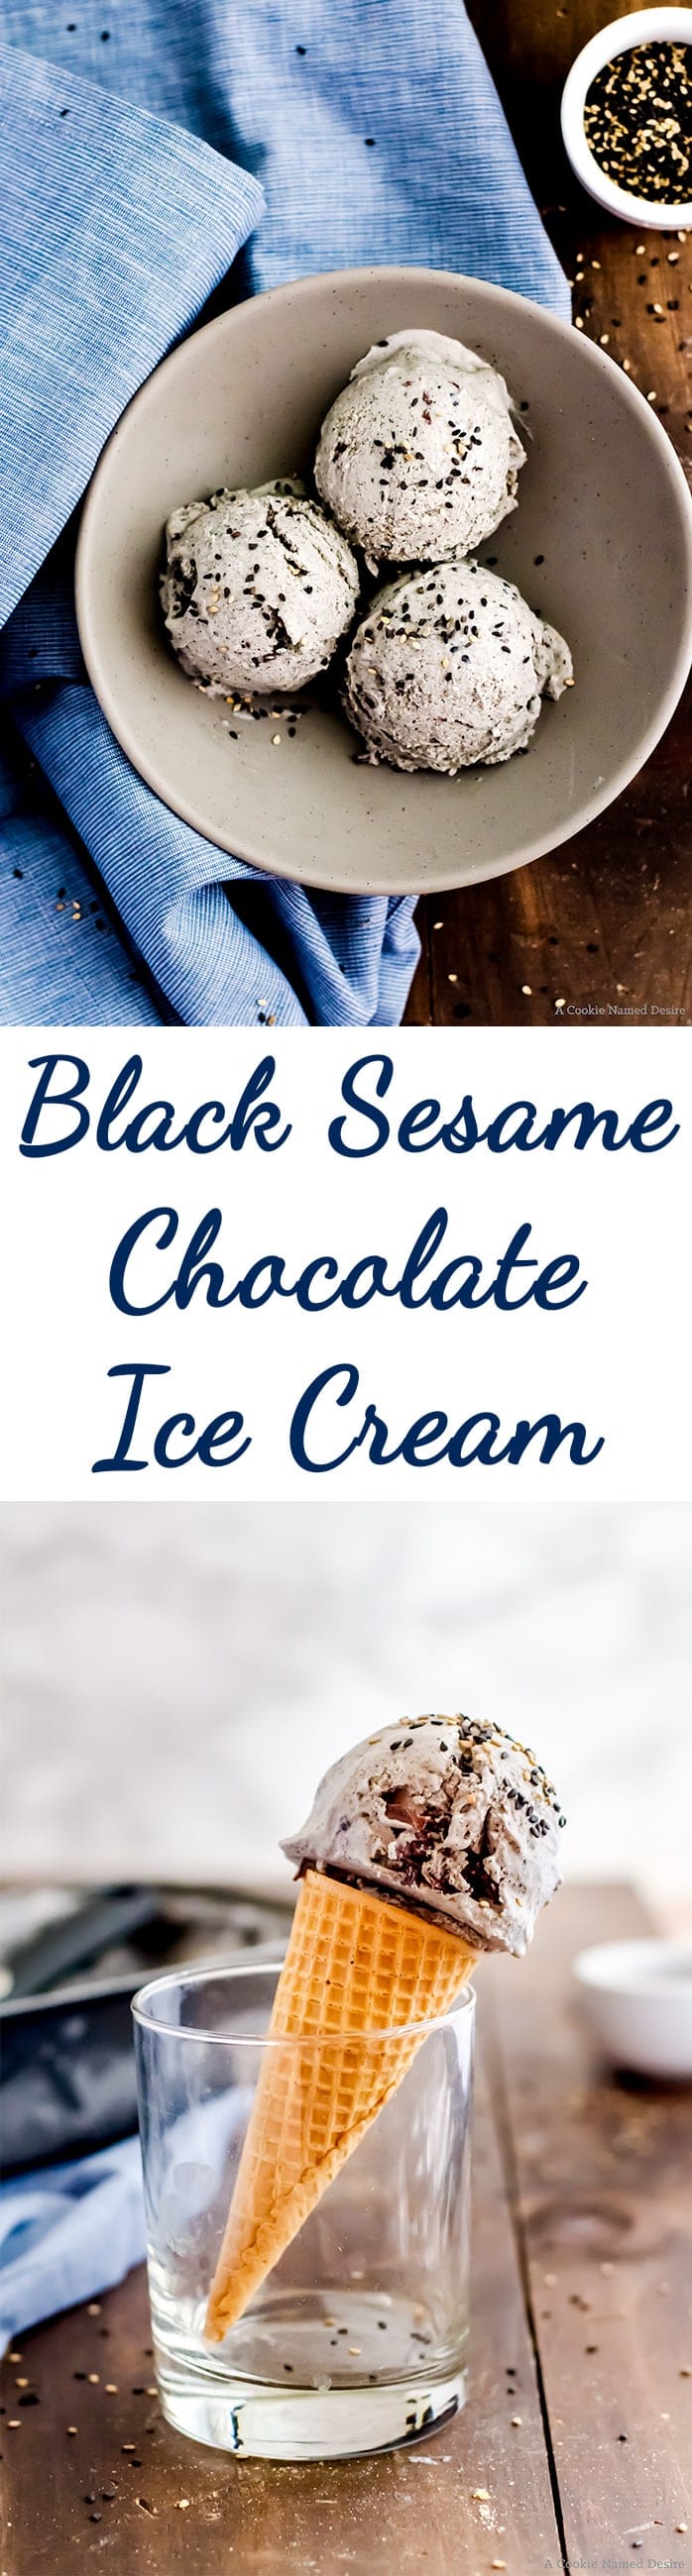 Black sesame ice cream is a sweet, nutty, and unique treat complemented with shards of chocolate studded throughout. You are going to fall in love with its fun color and rich, roasted flavor. 